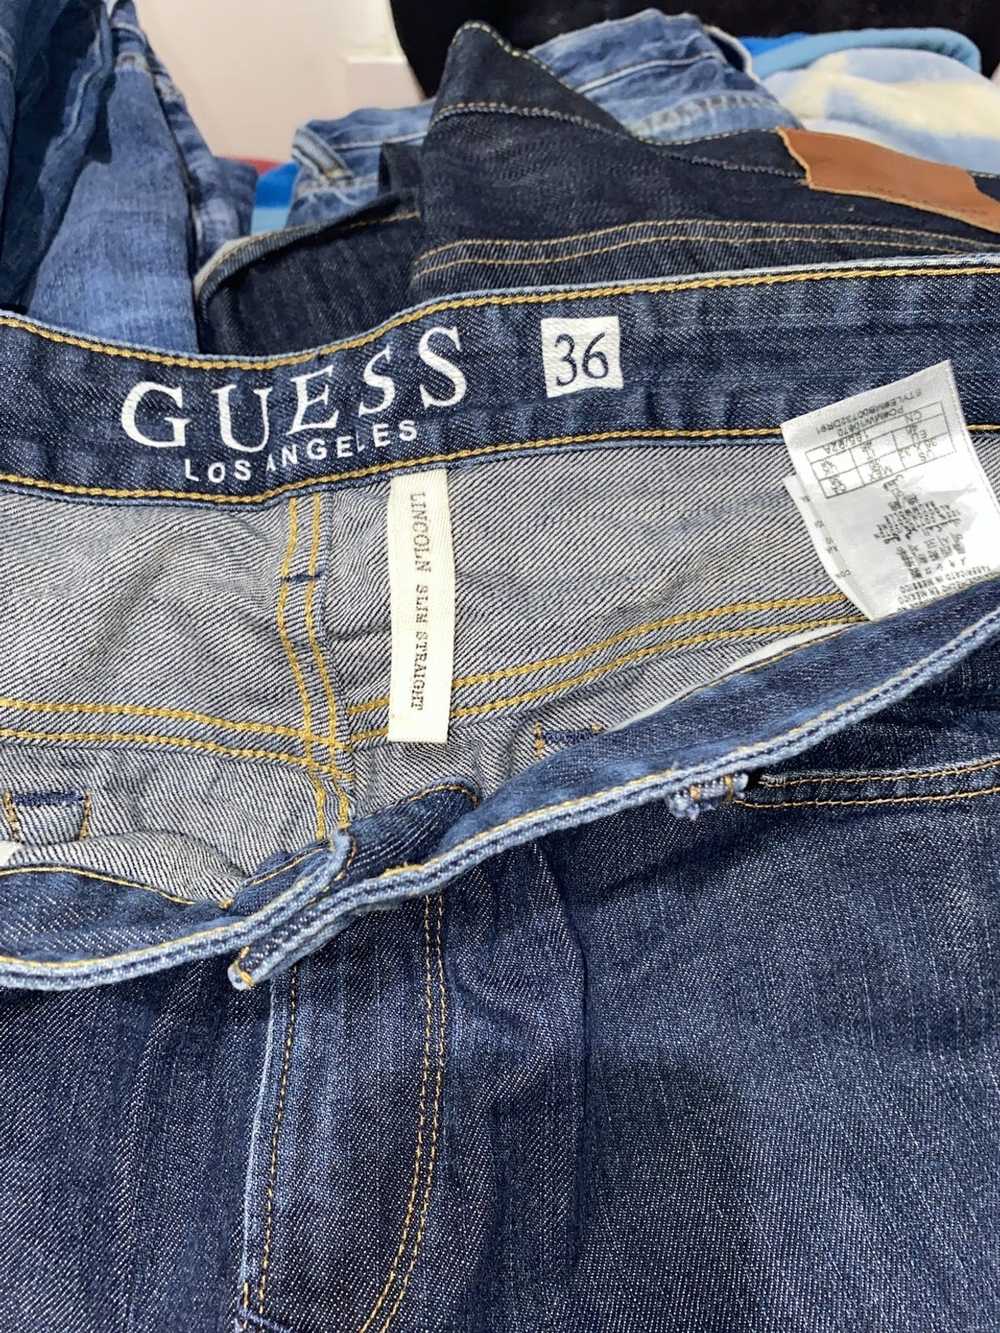 Guess Guess jeans - image 3